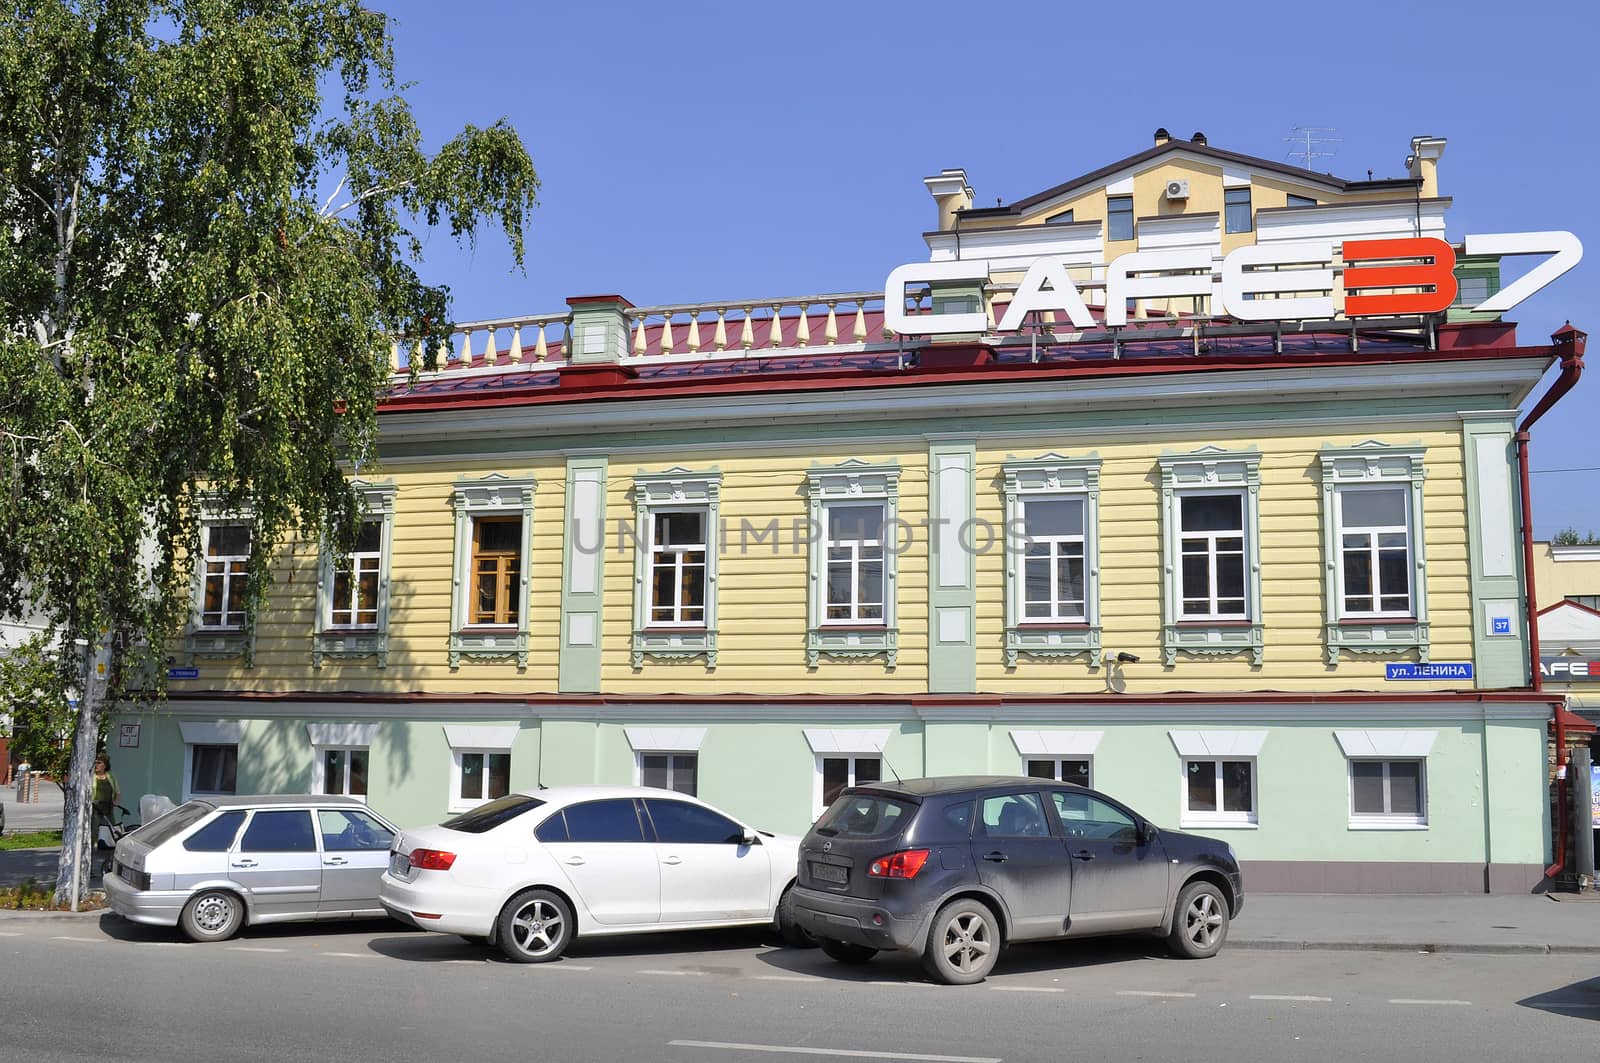 building of cafe Cafe 37, Tyumen, Russia